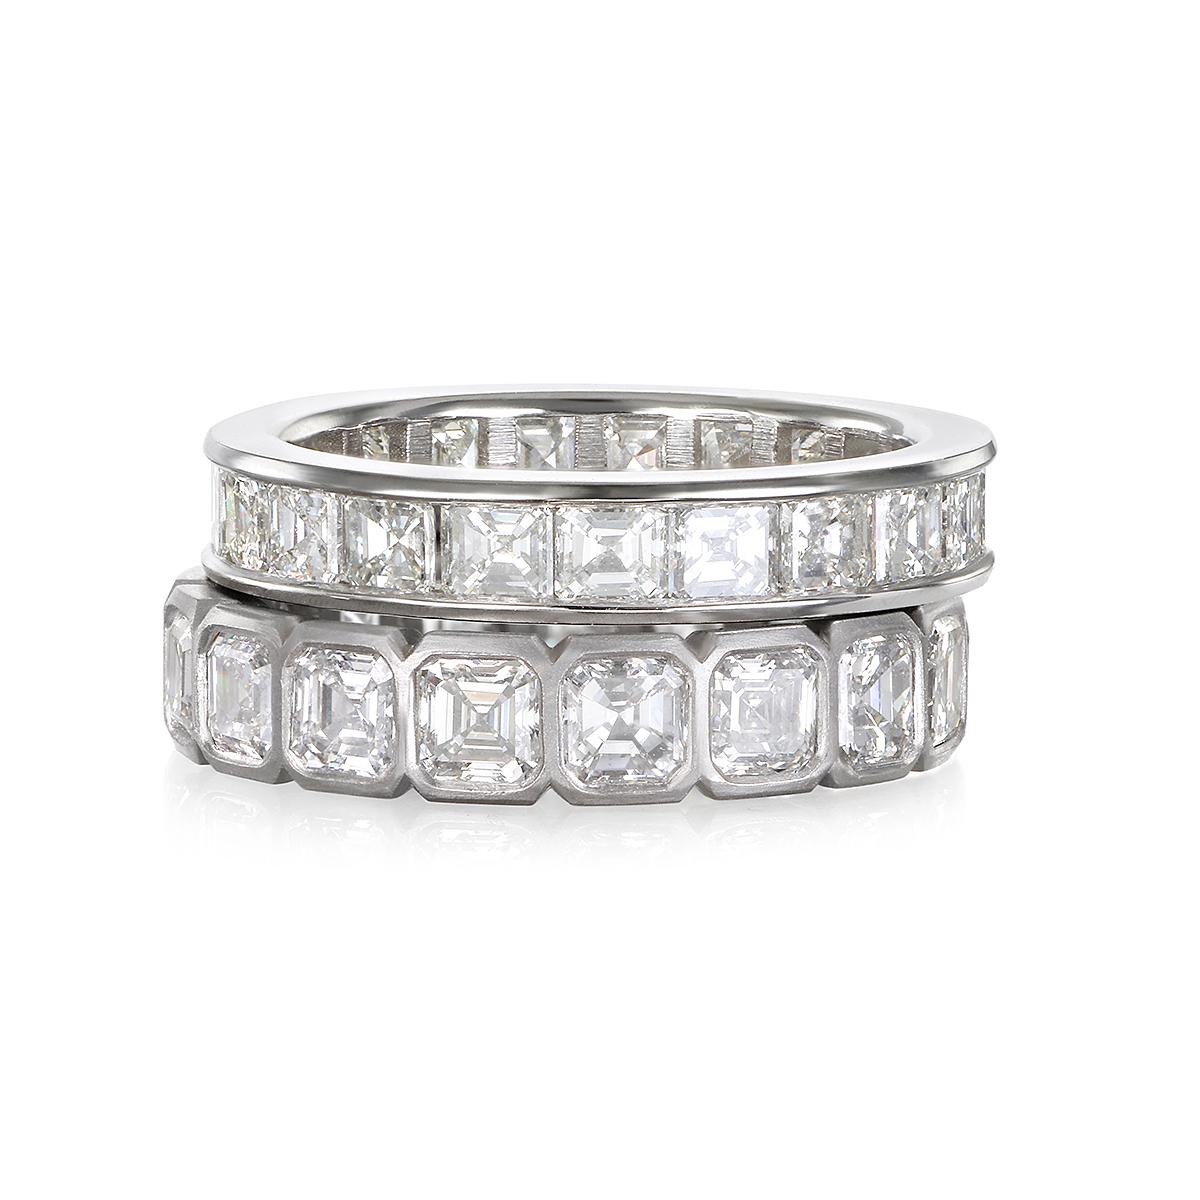 Faye Kim's Platinum Asscher Diamond Eternity Ring is both timeless and modern, with its bezel-set square cut diamonds that feature large step facets and high crowns, producing a spectacular brilliance. This ring, with its elegant and contemporary